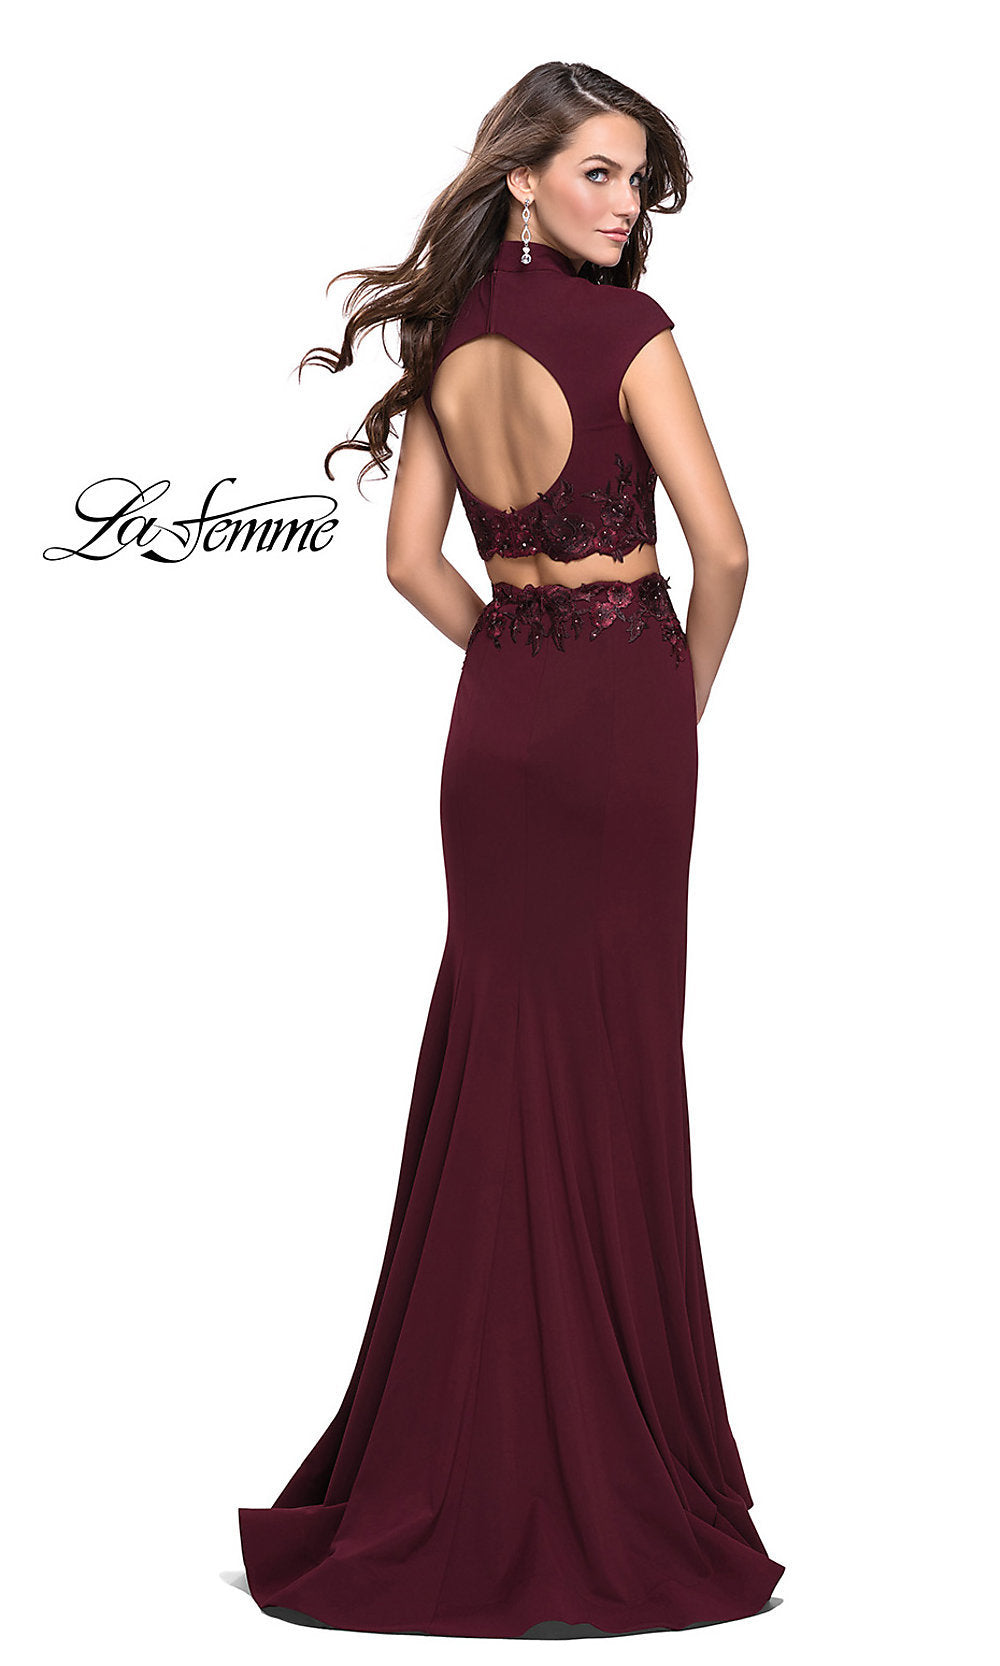  Mock-Neck Two-Piece Prom Dress with Cap Sleeves